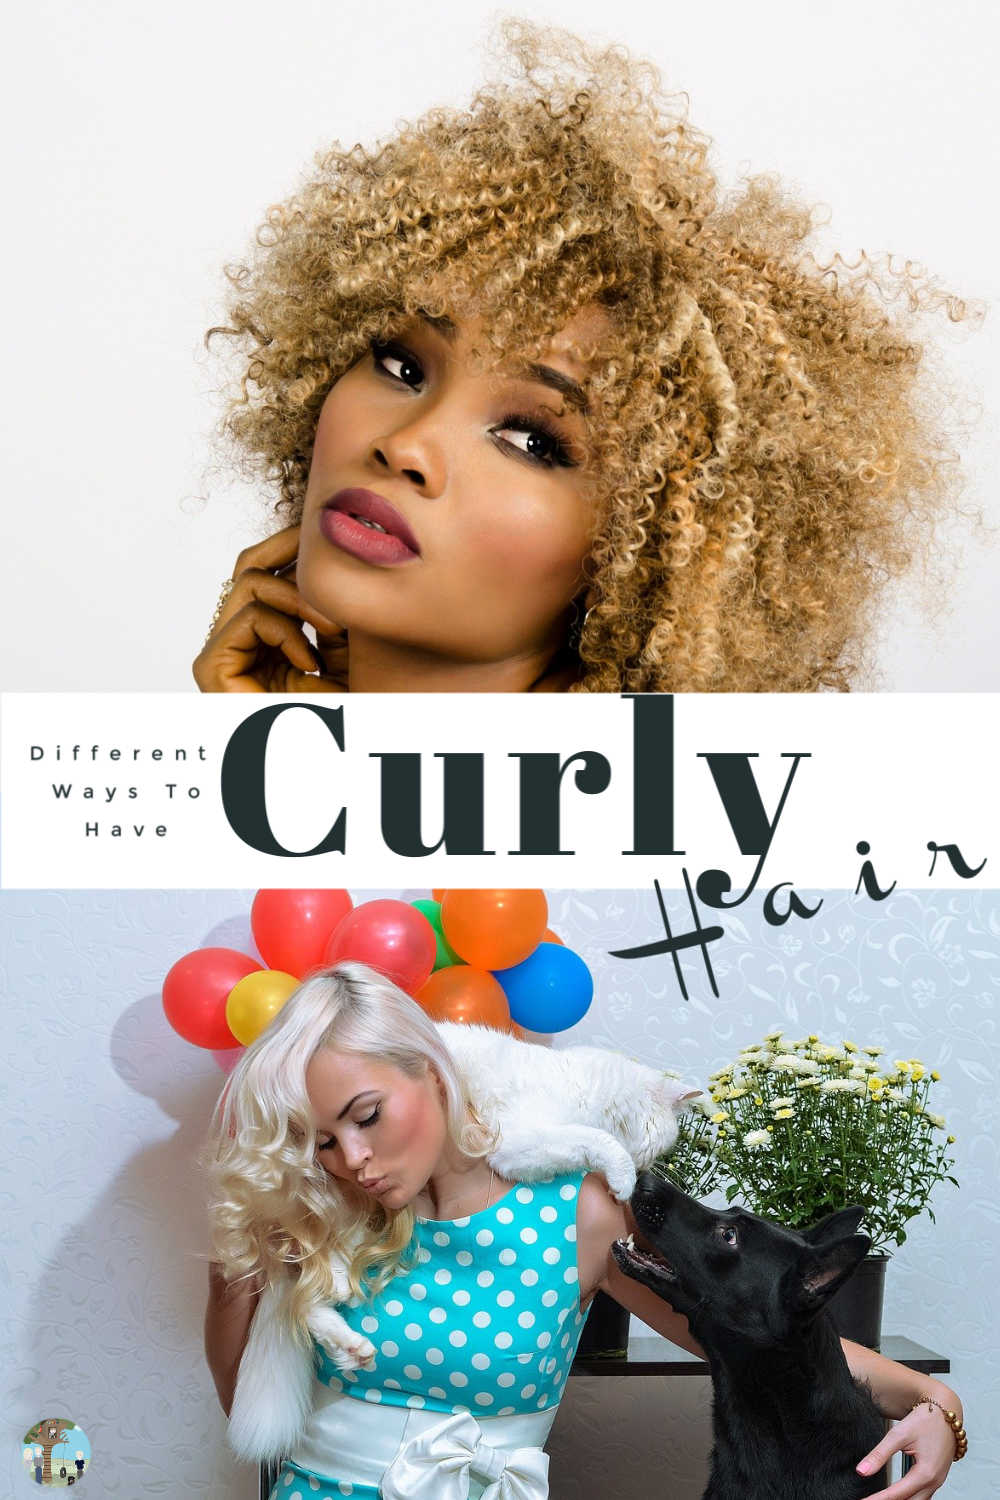 Different ways to curl your hair or have curly hair